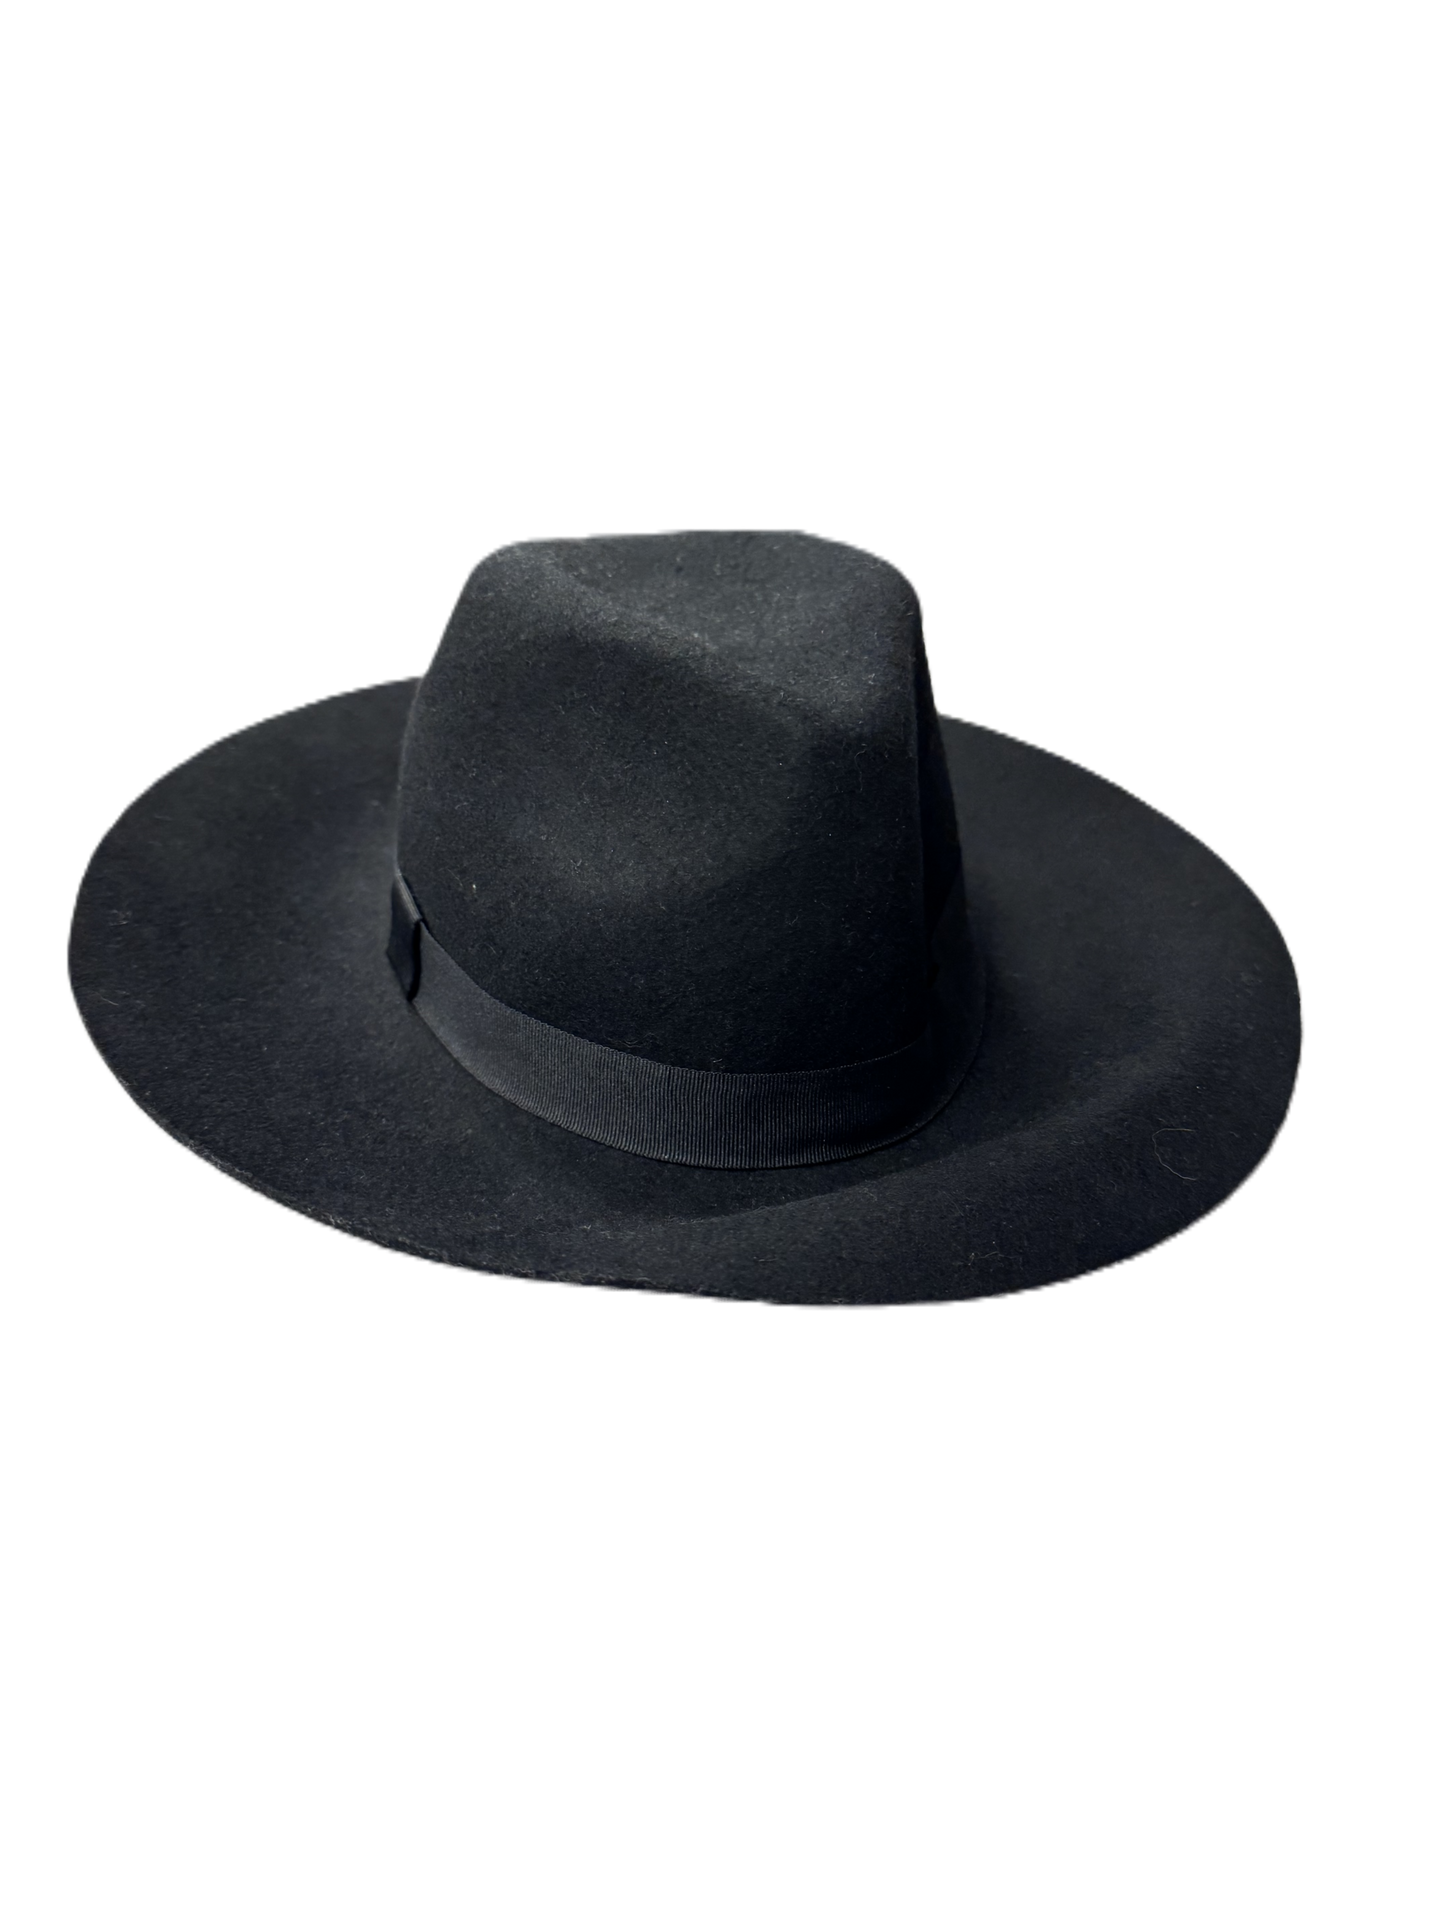 Hat Fedora By august hat